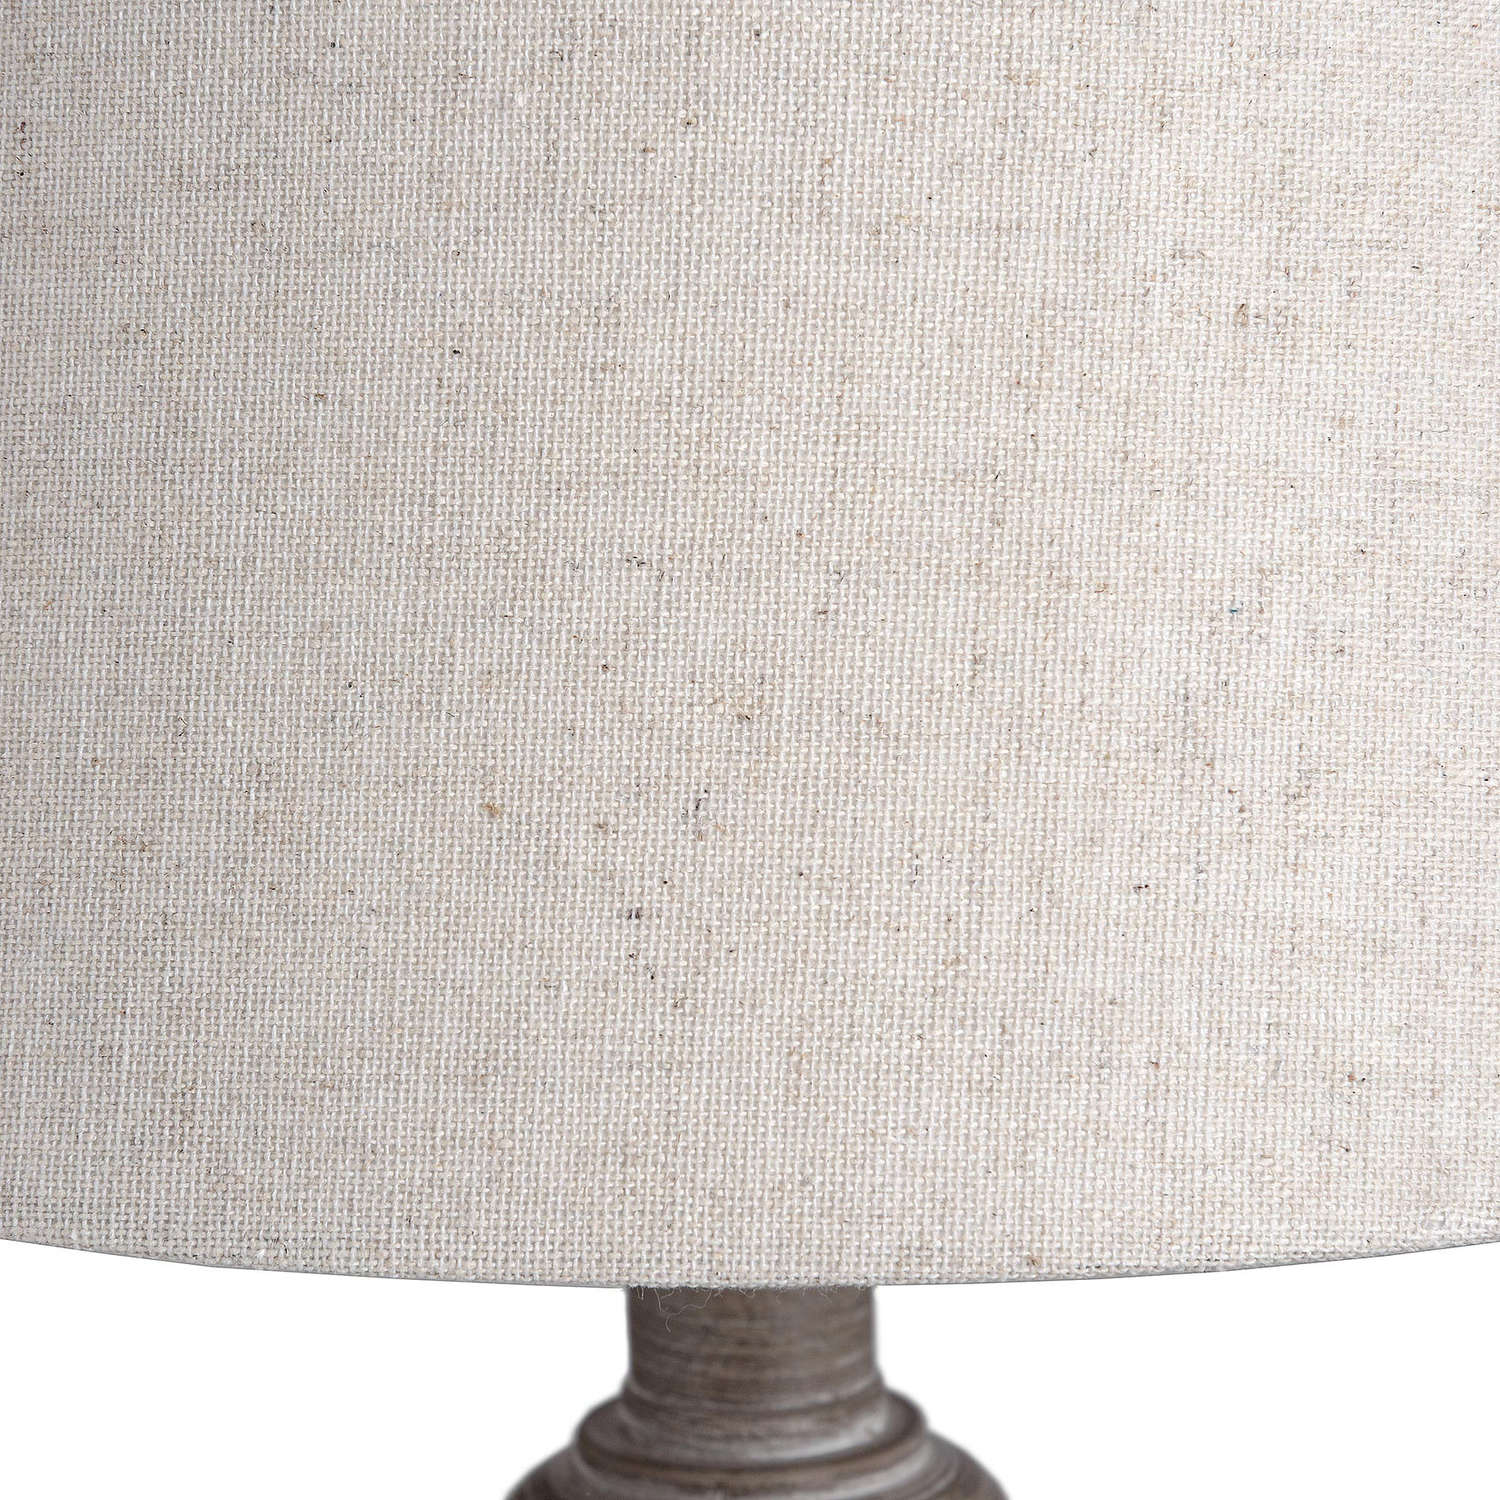 Teos Table Lamp - Image 3